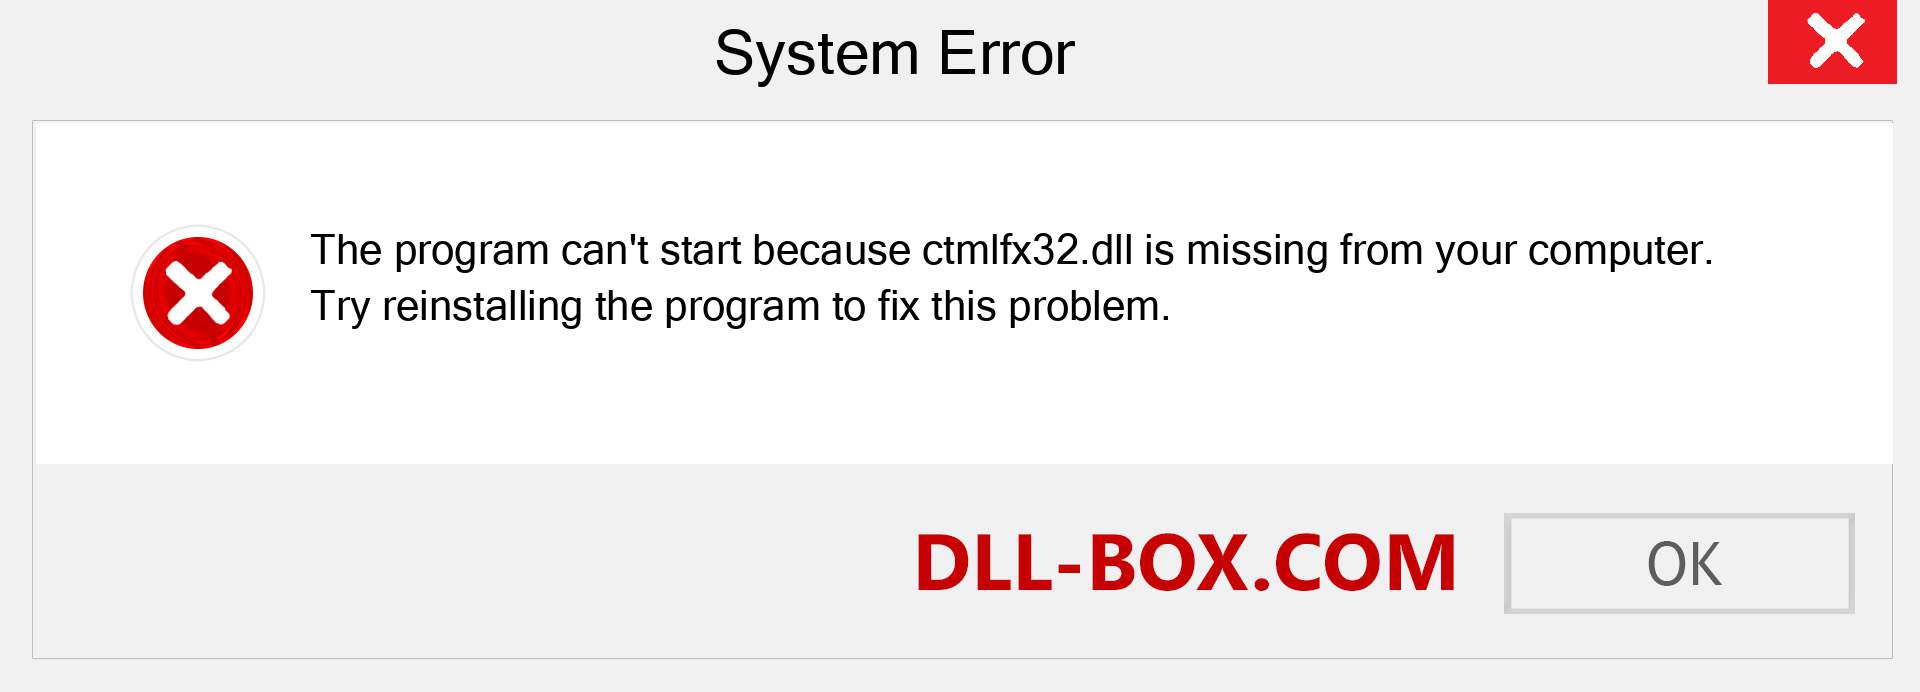  ctmlfx32.dll file is missing?. Download for Windows 7, 8, 10 - Fix  ctmlfx32 dll Missing Error on Windows, photos, images